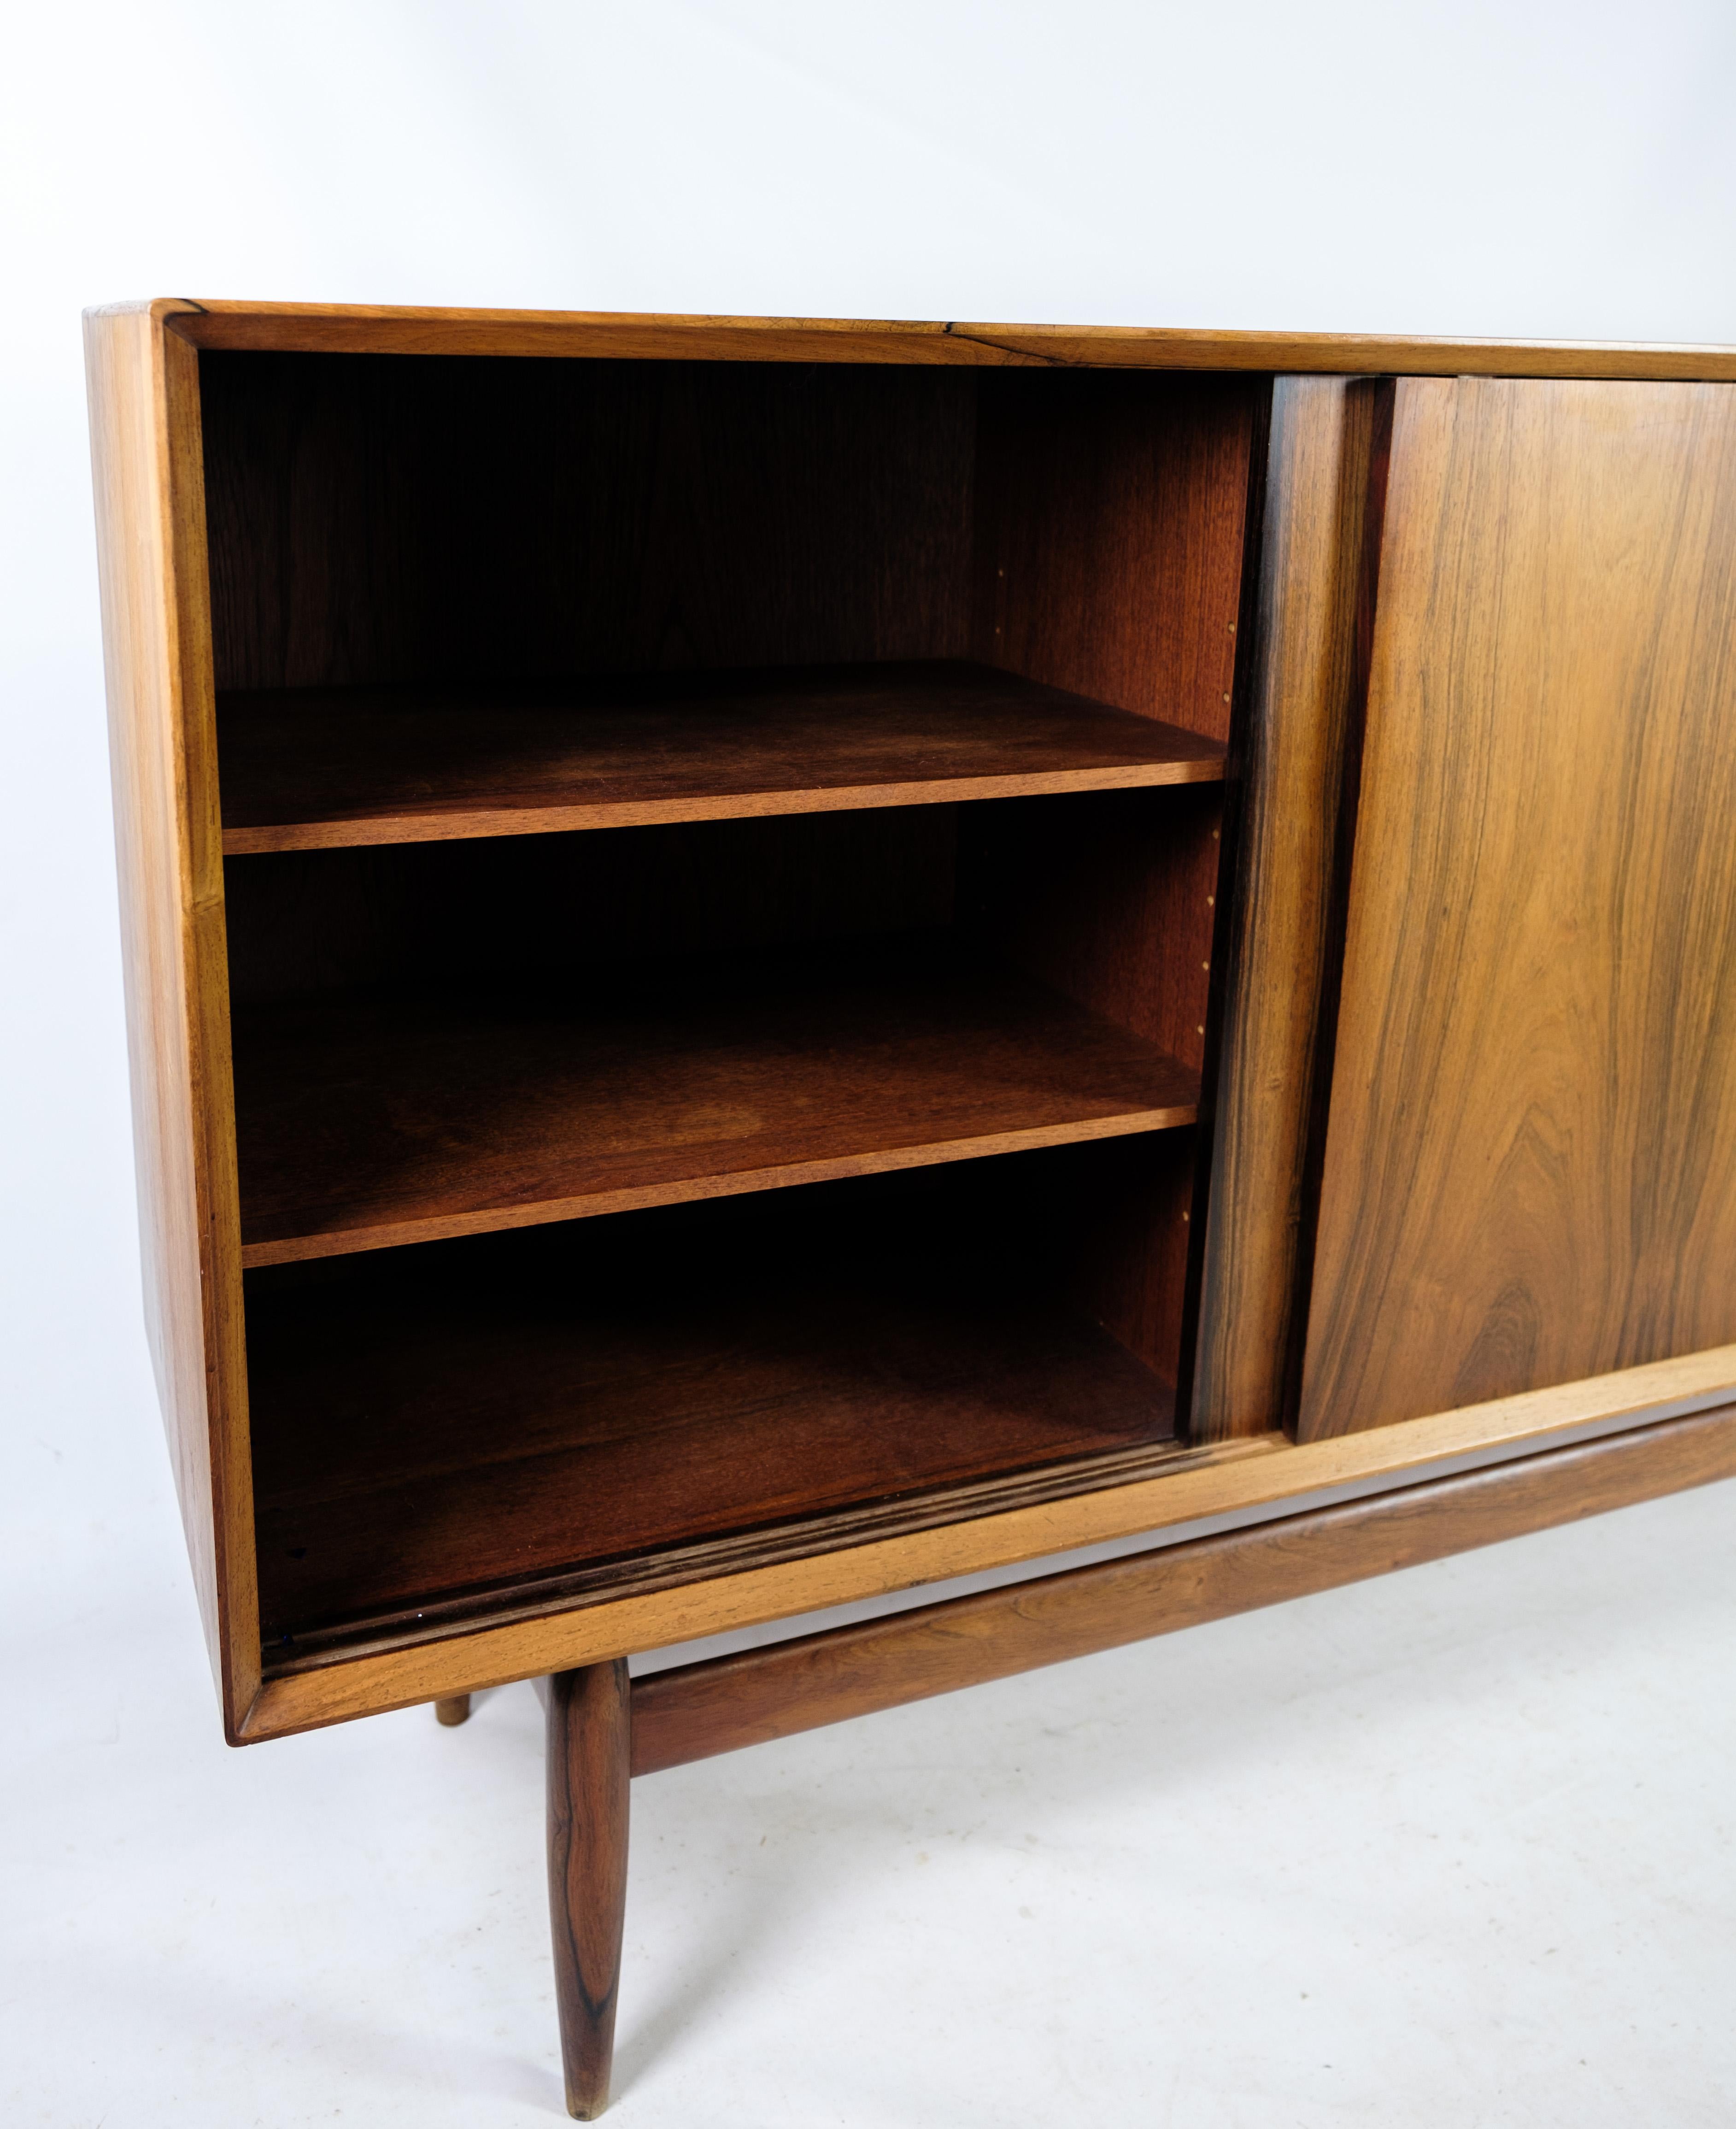 High sideboard in rosewood of Danish design from around the 1960s. A sideboard of high quality, which you can see on the handles, as well as the rosewood structure. Inside, there are both shelves and drawers, where the drawers have fine joints.